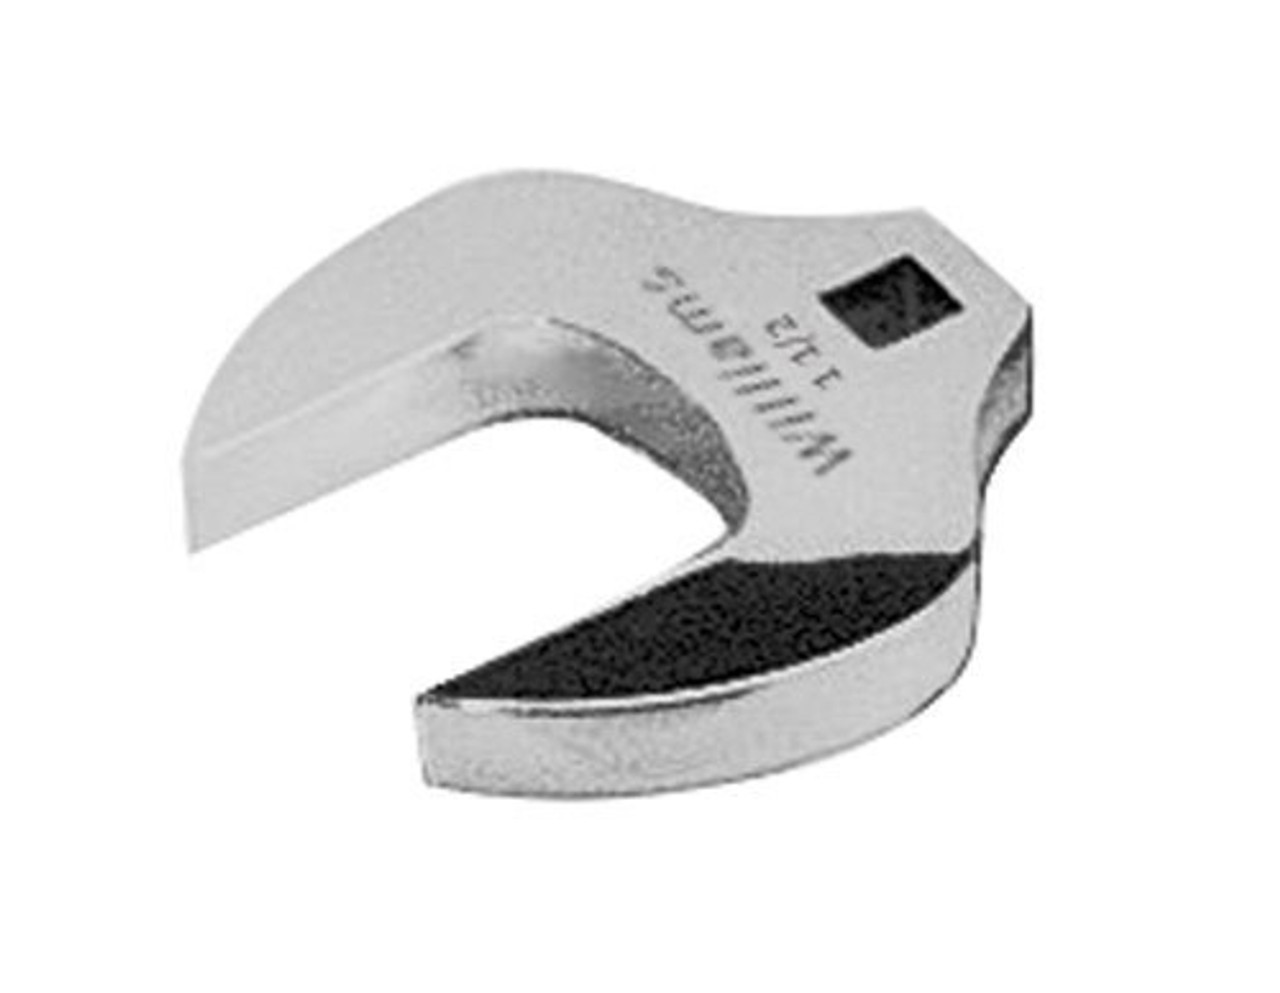 Williams 2 1/8 Williams 1/2 Dr Open End Crowfoot Wrench - SCOE68